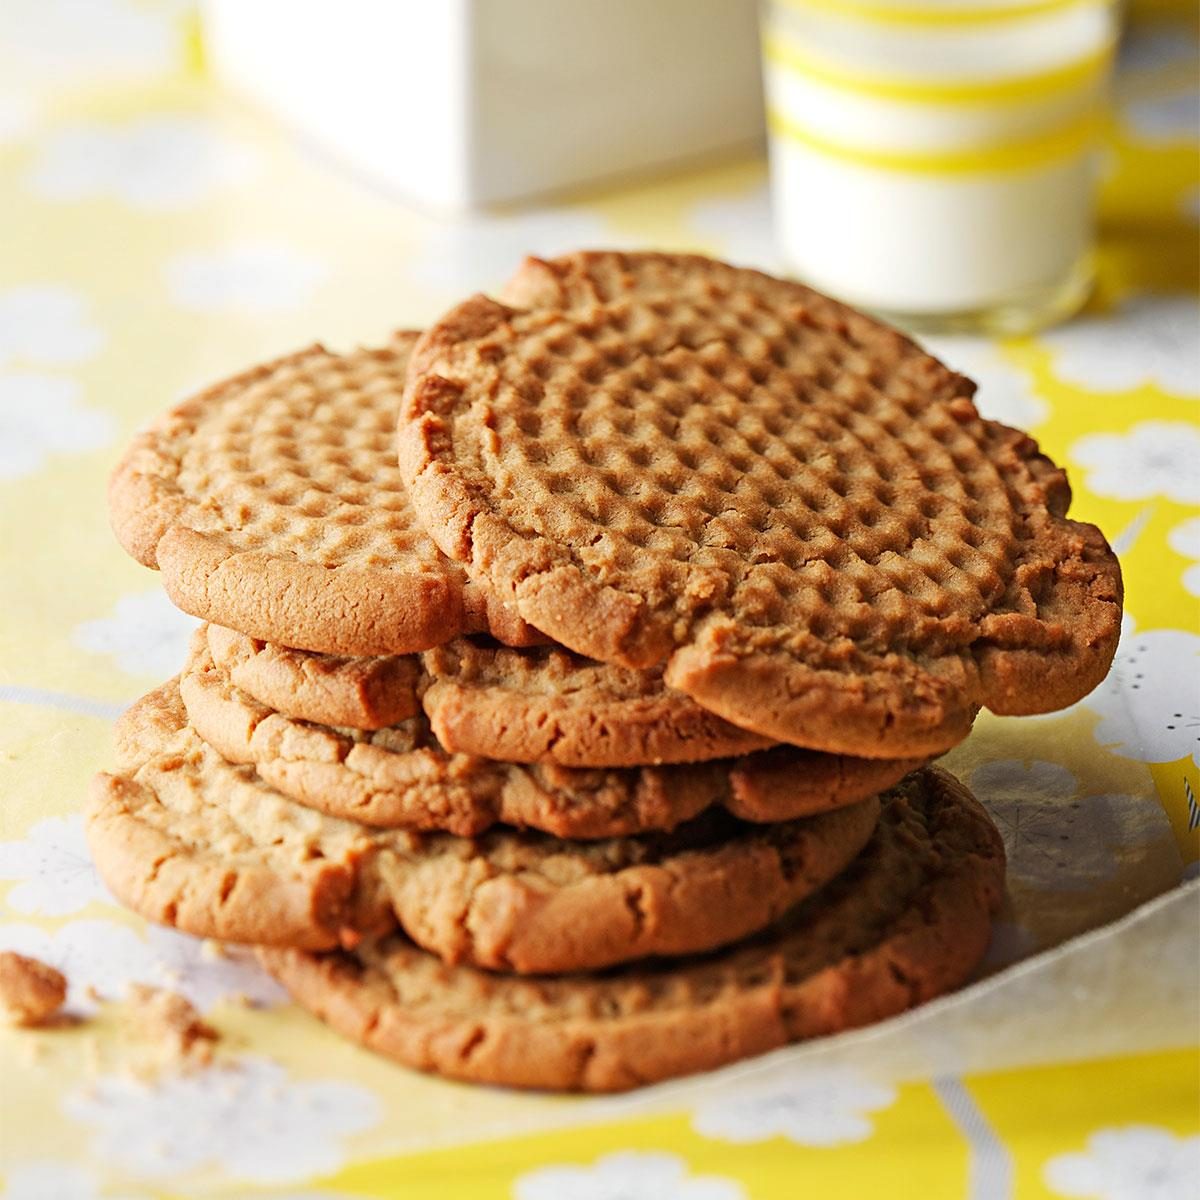 https://www.tasteofhome.com/wp-content/uploads/2017/09/Old-Fashioned-Peanut-Butter-Cookies_exps7873_THCB1914178B12_10_4b_RMS.jpg